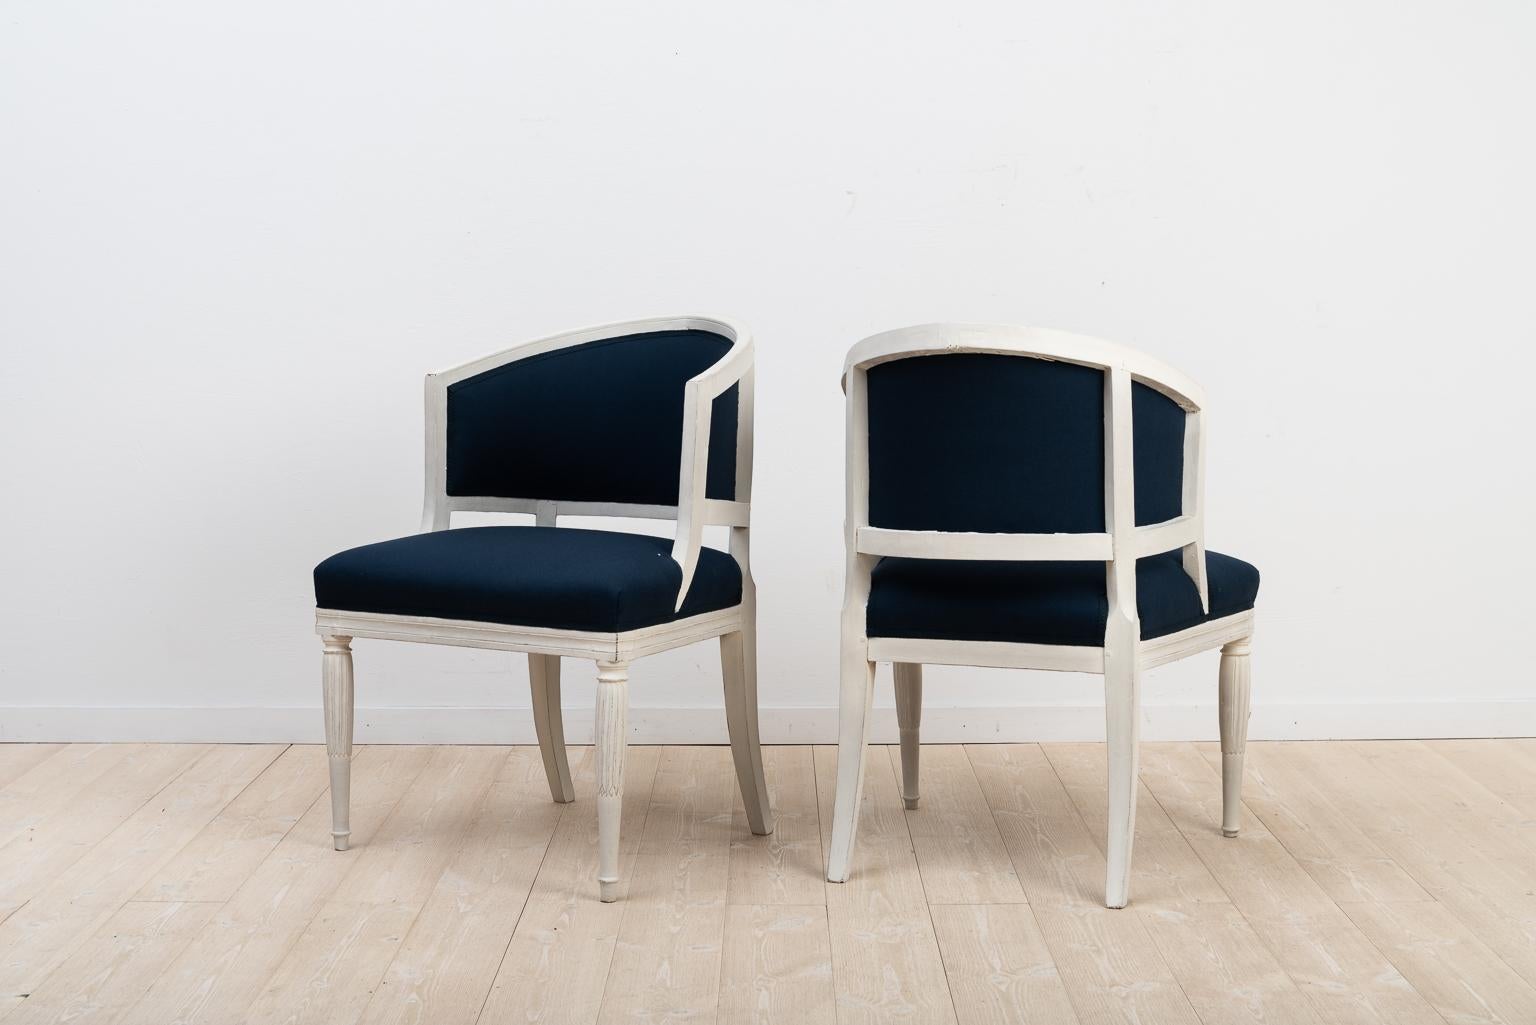 Swedish gustavian barrel back chairs in a set of two. The chairs are a true pair and manufactured during the early 1800s, around 1820. The chairs have been newly renovated with new padding and upholstery in a rich dark blue fabric that contrasts